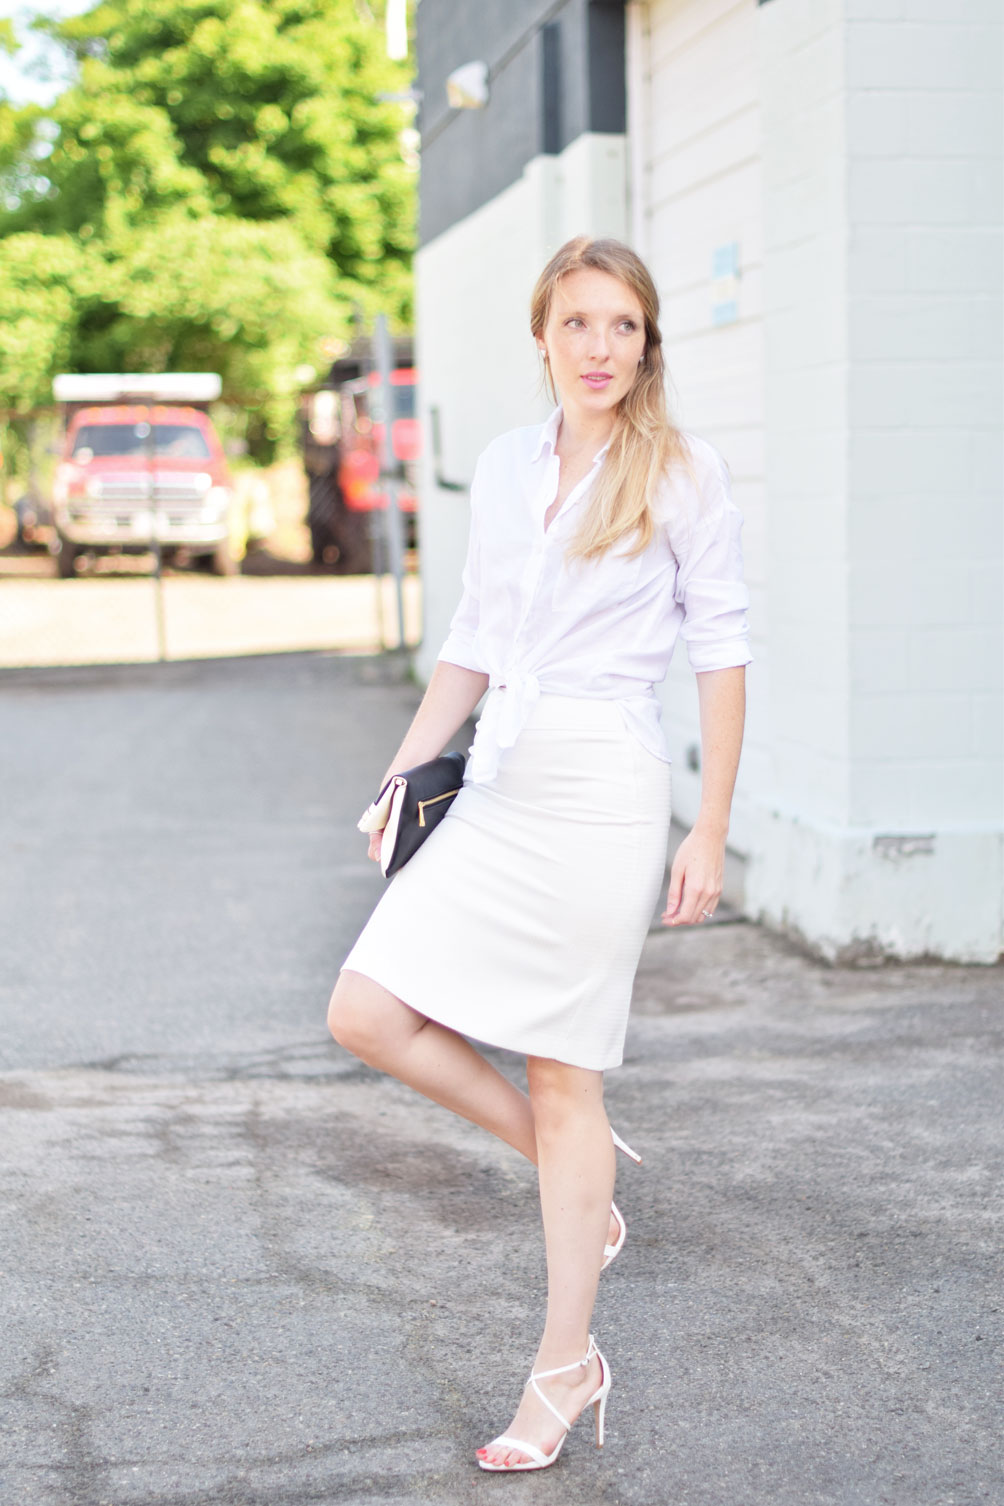 fashion blogger Leslie Musser of one brass fox shares her tips on mixing summer whites